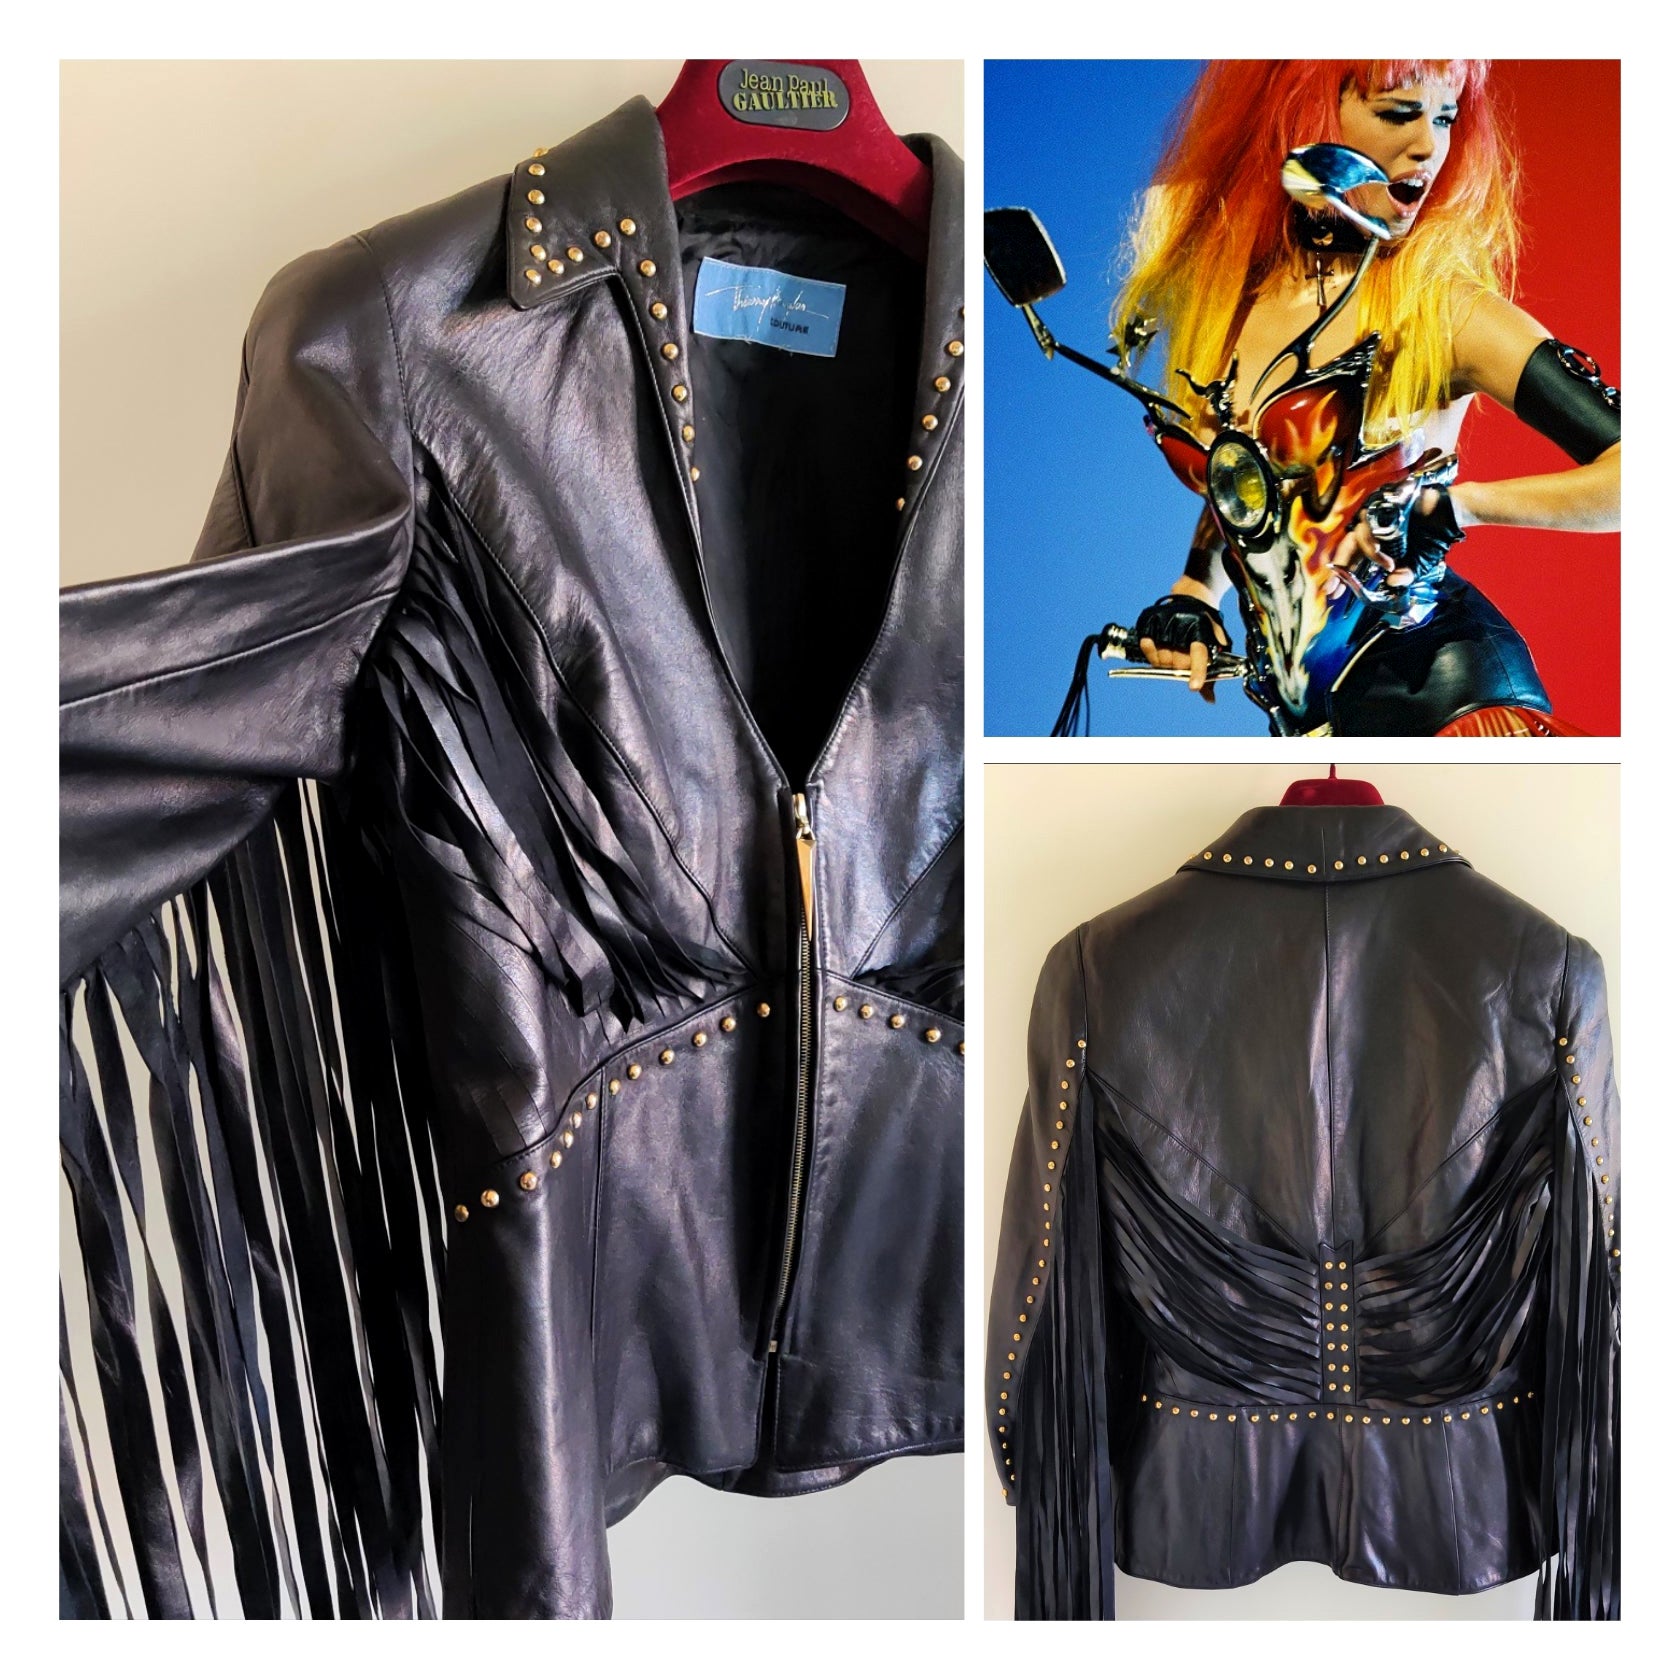 Ultra rare “Arc En Ciel” (Rainbow)  Thierry Mugler skirt suit from the Spring Summer 1990 Collection.

Jacket has shoulder pads and wasp waist. You can adjust the waist with the waist belt.
Wrap skirt. 
The suit is fully lined. 
Linda Evangelista